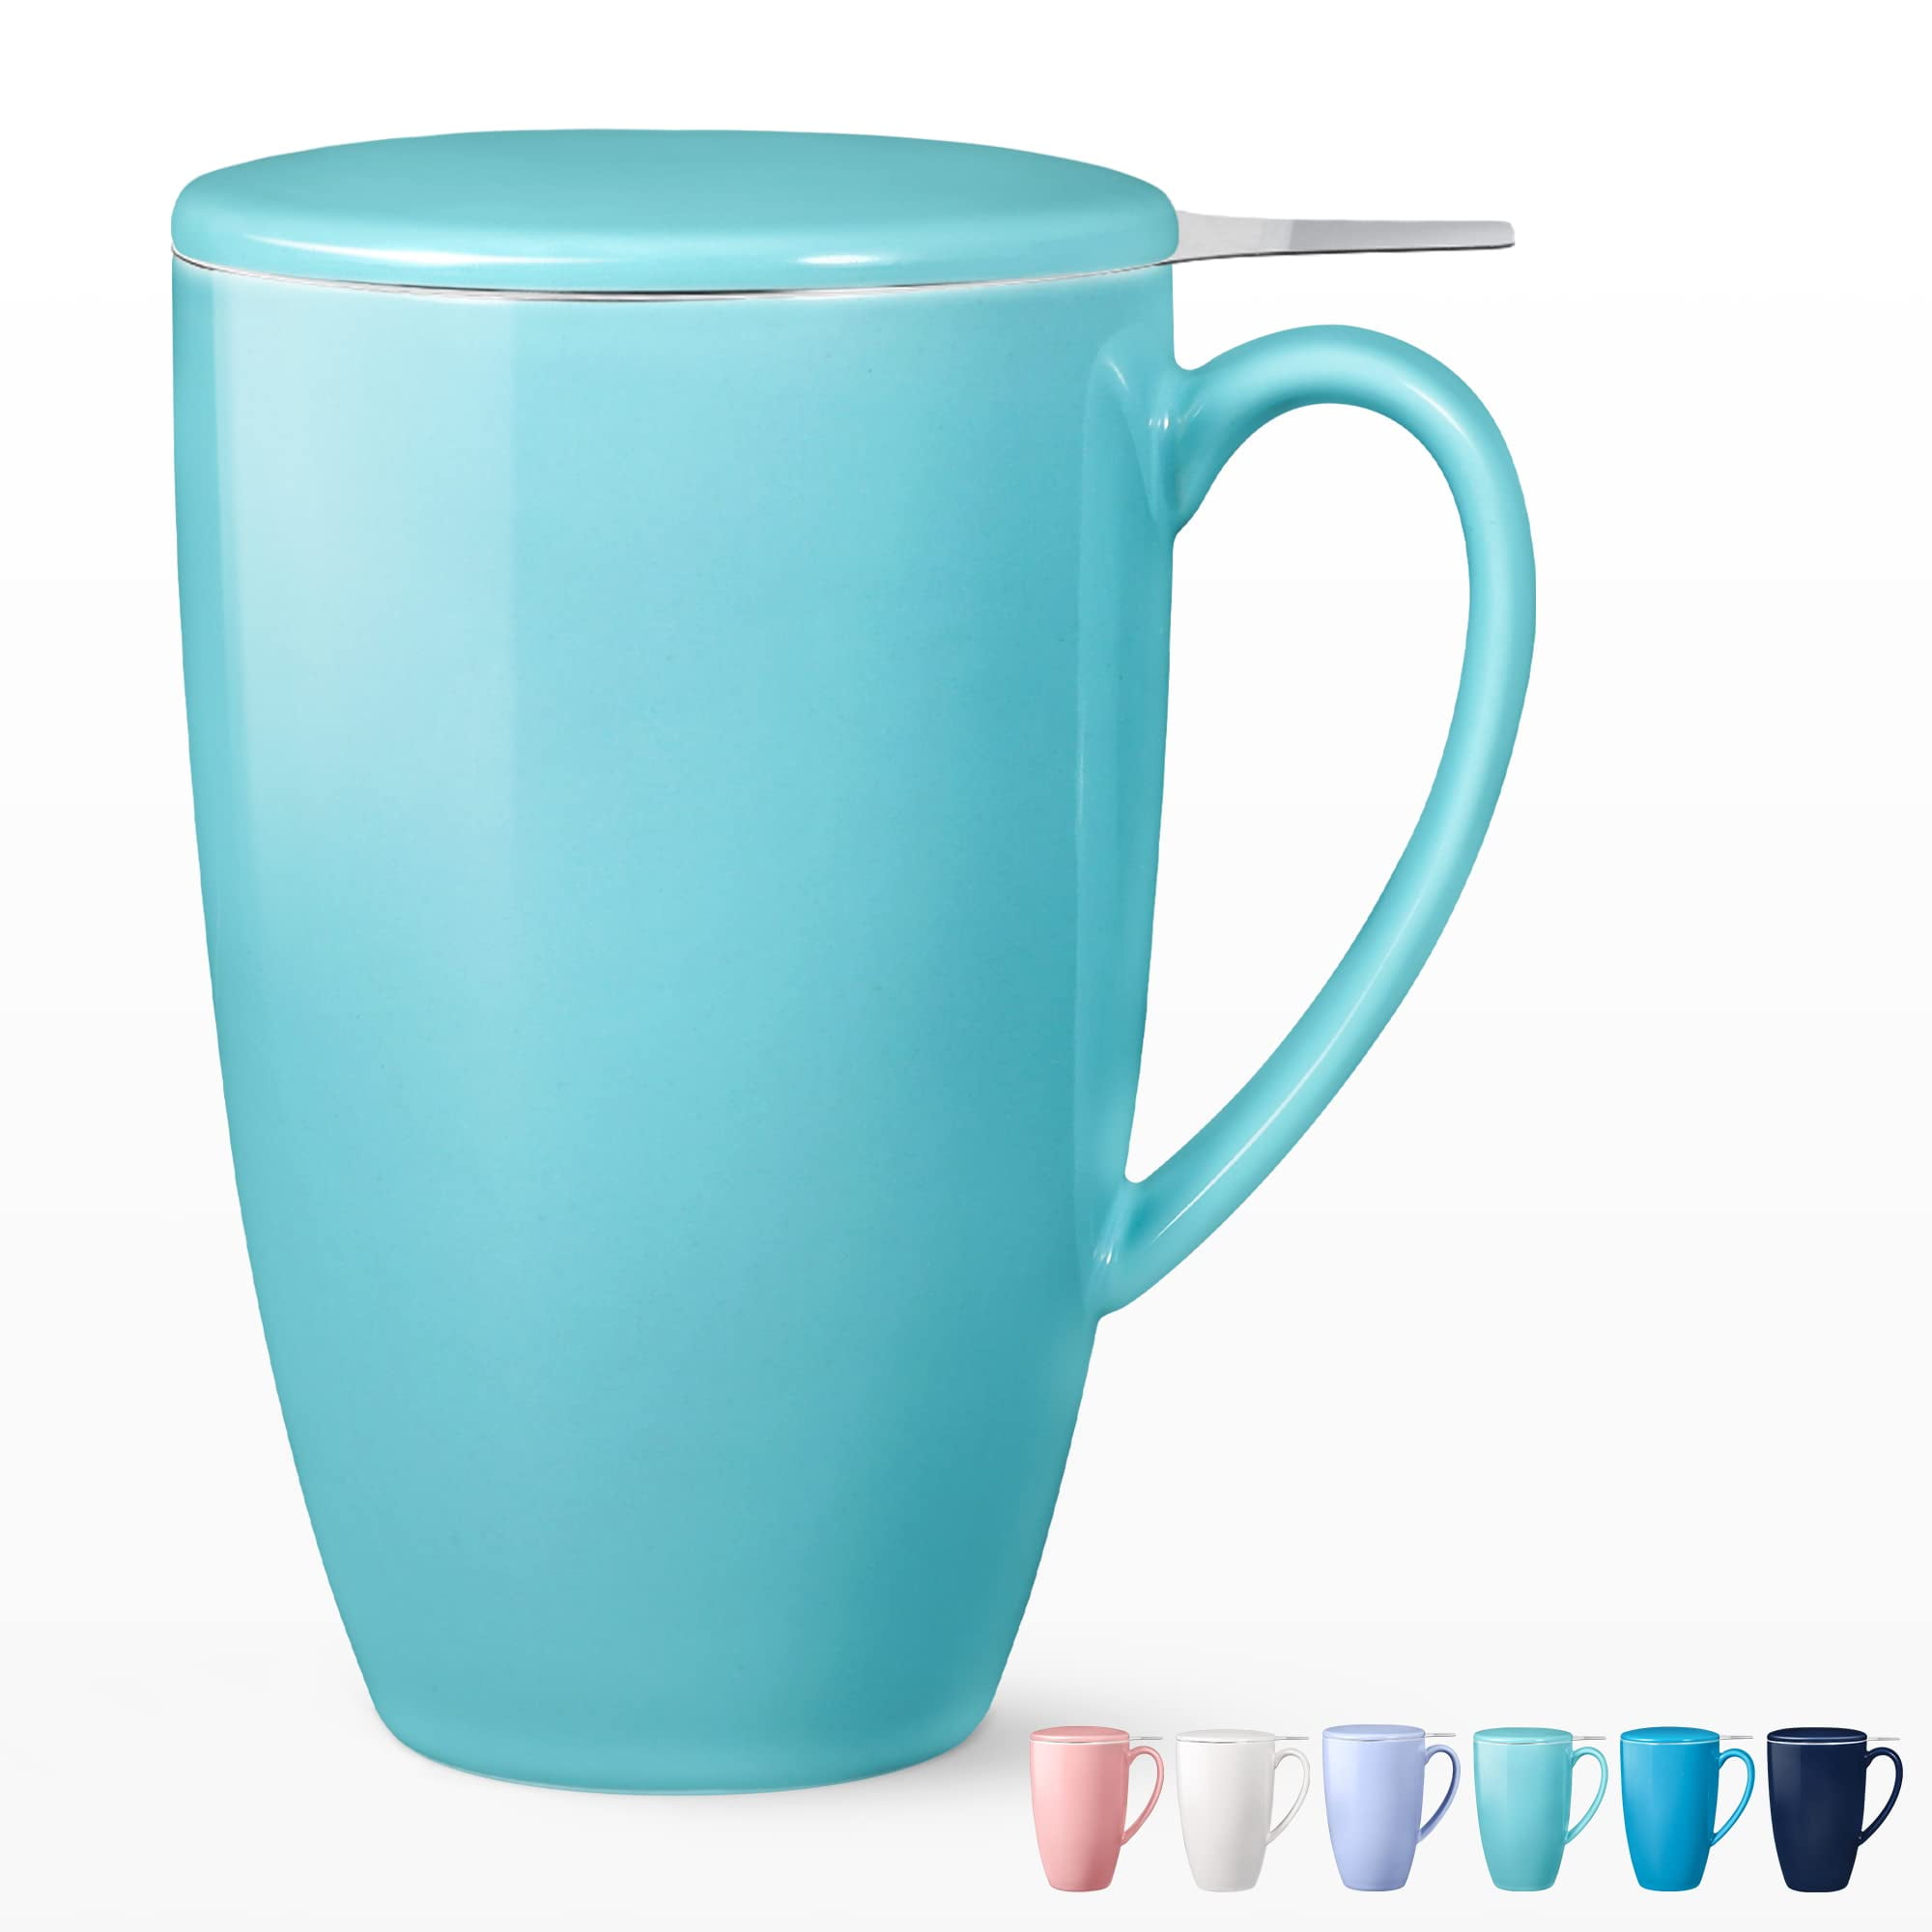 Hot Chocolate Mug Set for Kids Tea Mug With Filter And Lid With Tea Infuser  Tea Filter Dishwasher Coffee Travel Mug Tea Accessories With Cold Brew